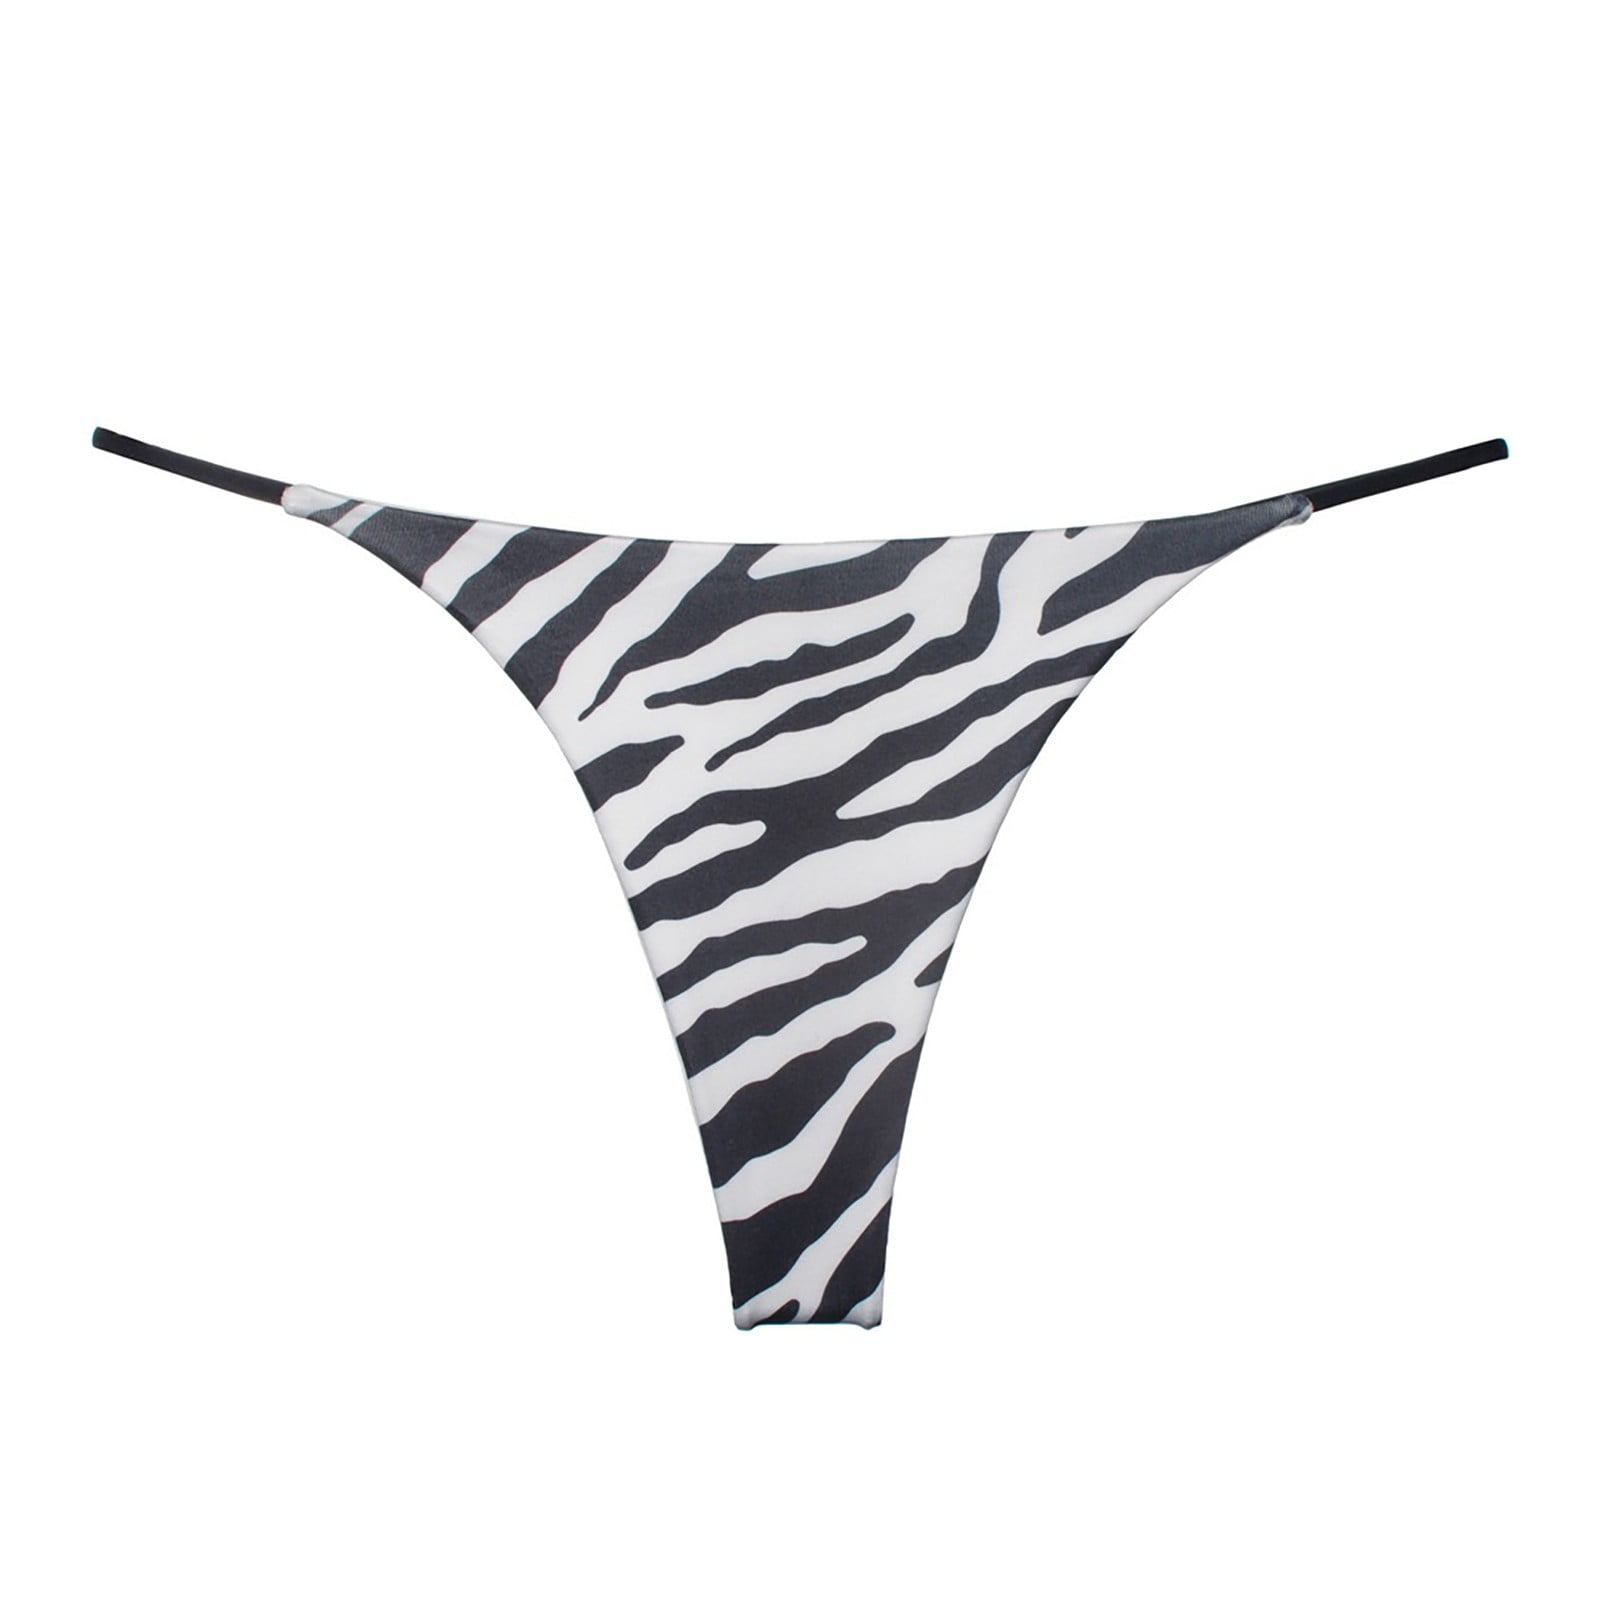 XZHGS Graphic Prints Winter Brief Women's Thong Low Rise Double